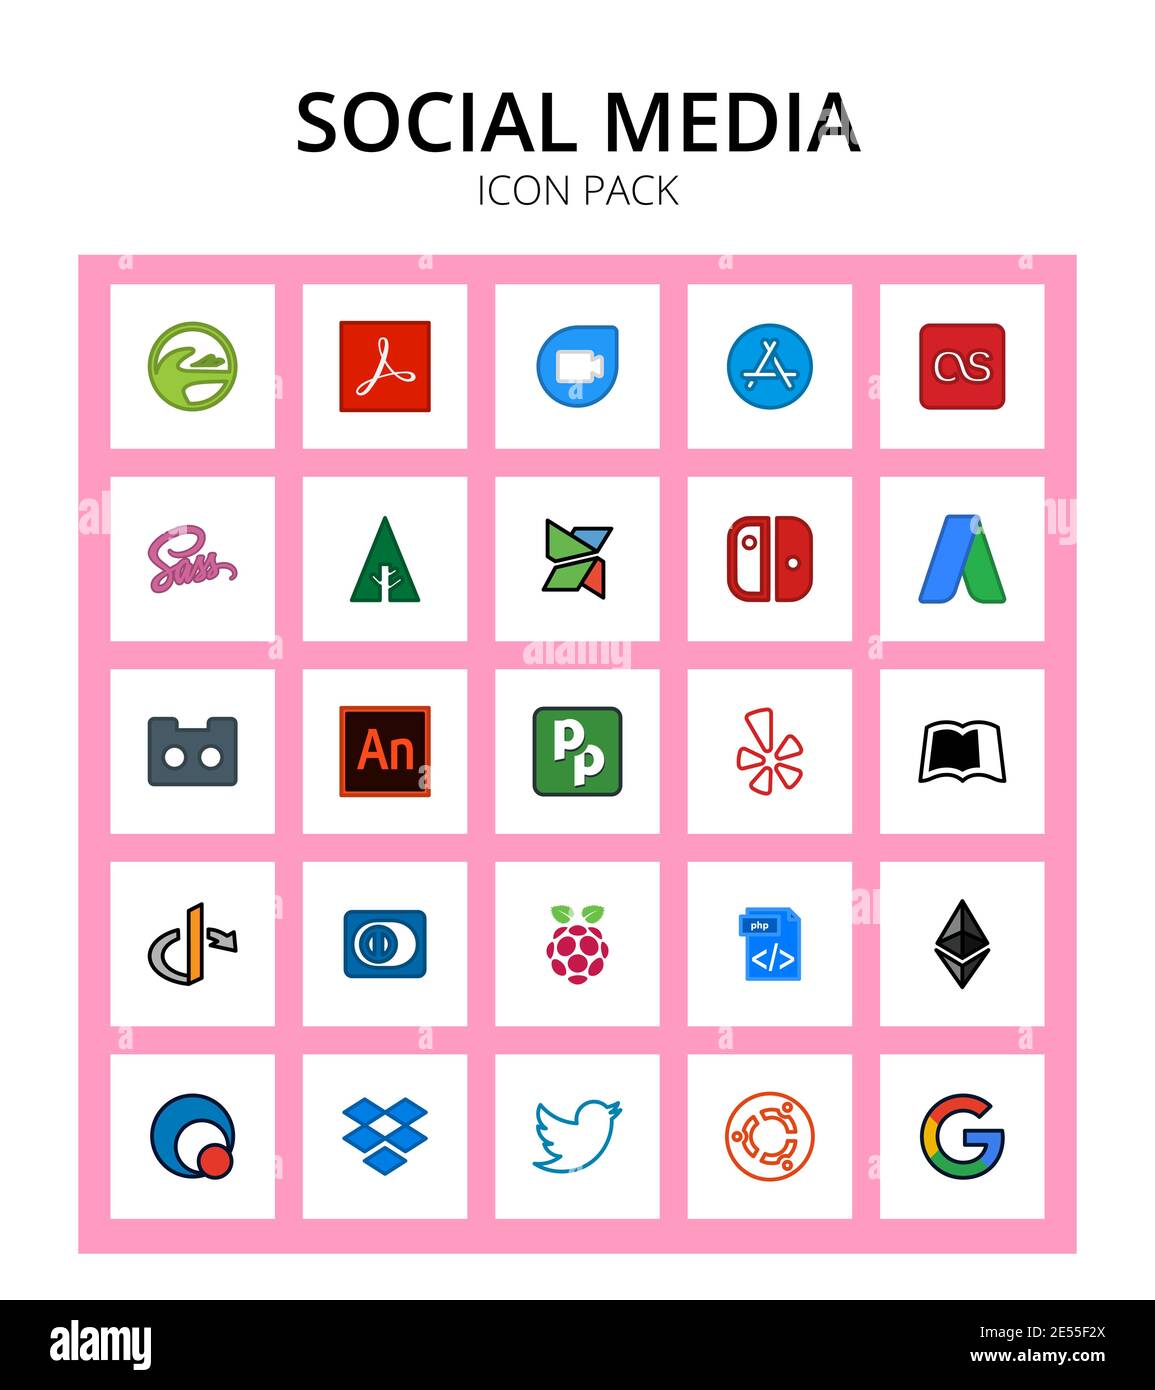 25 Social icon pied, animate, sass, simplybuilt, switch Editable Vector Design Elements Stock Vector